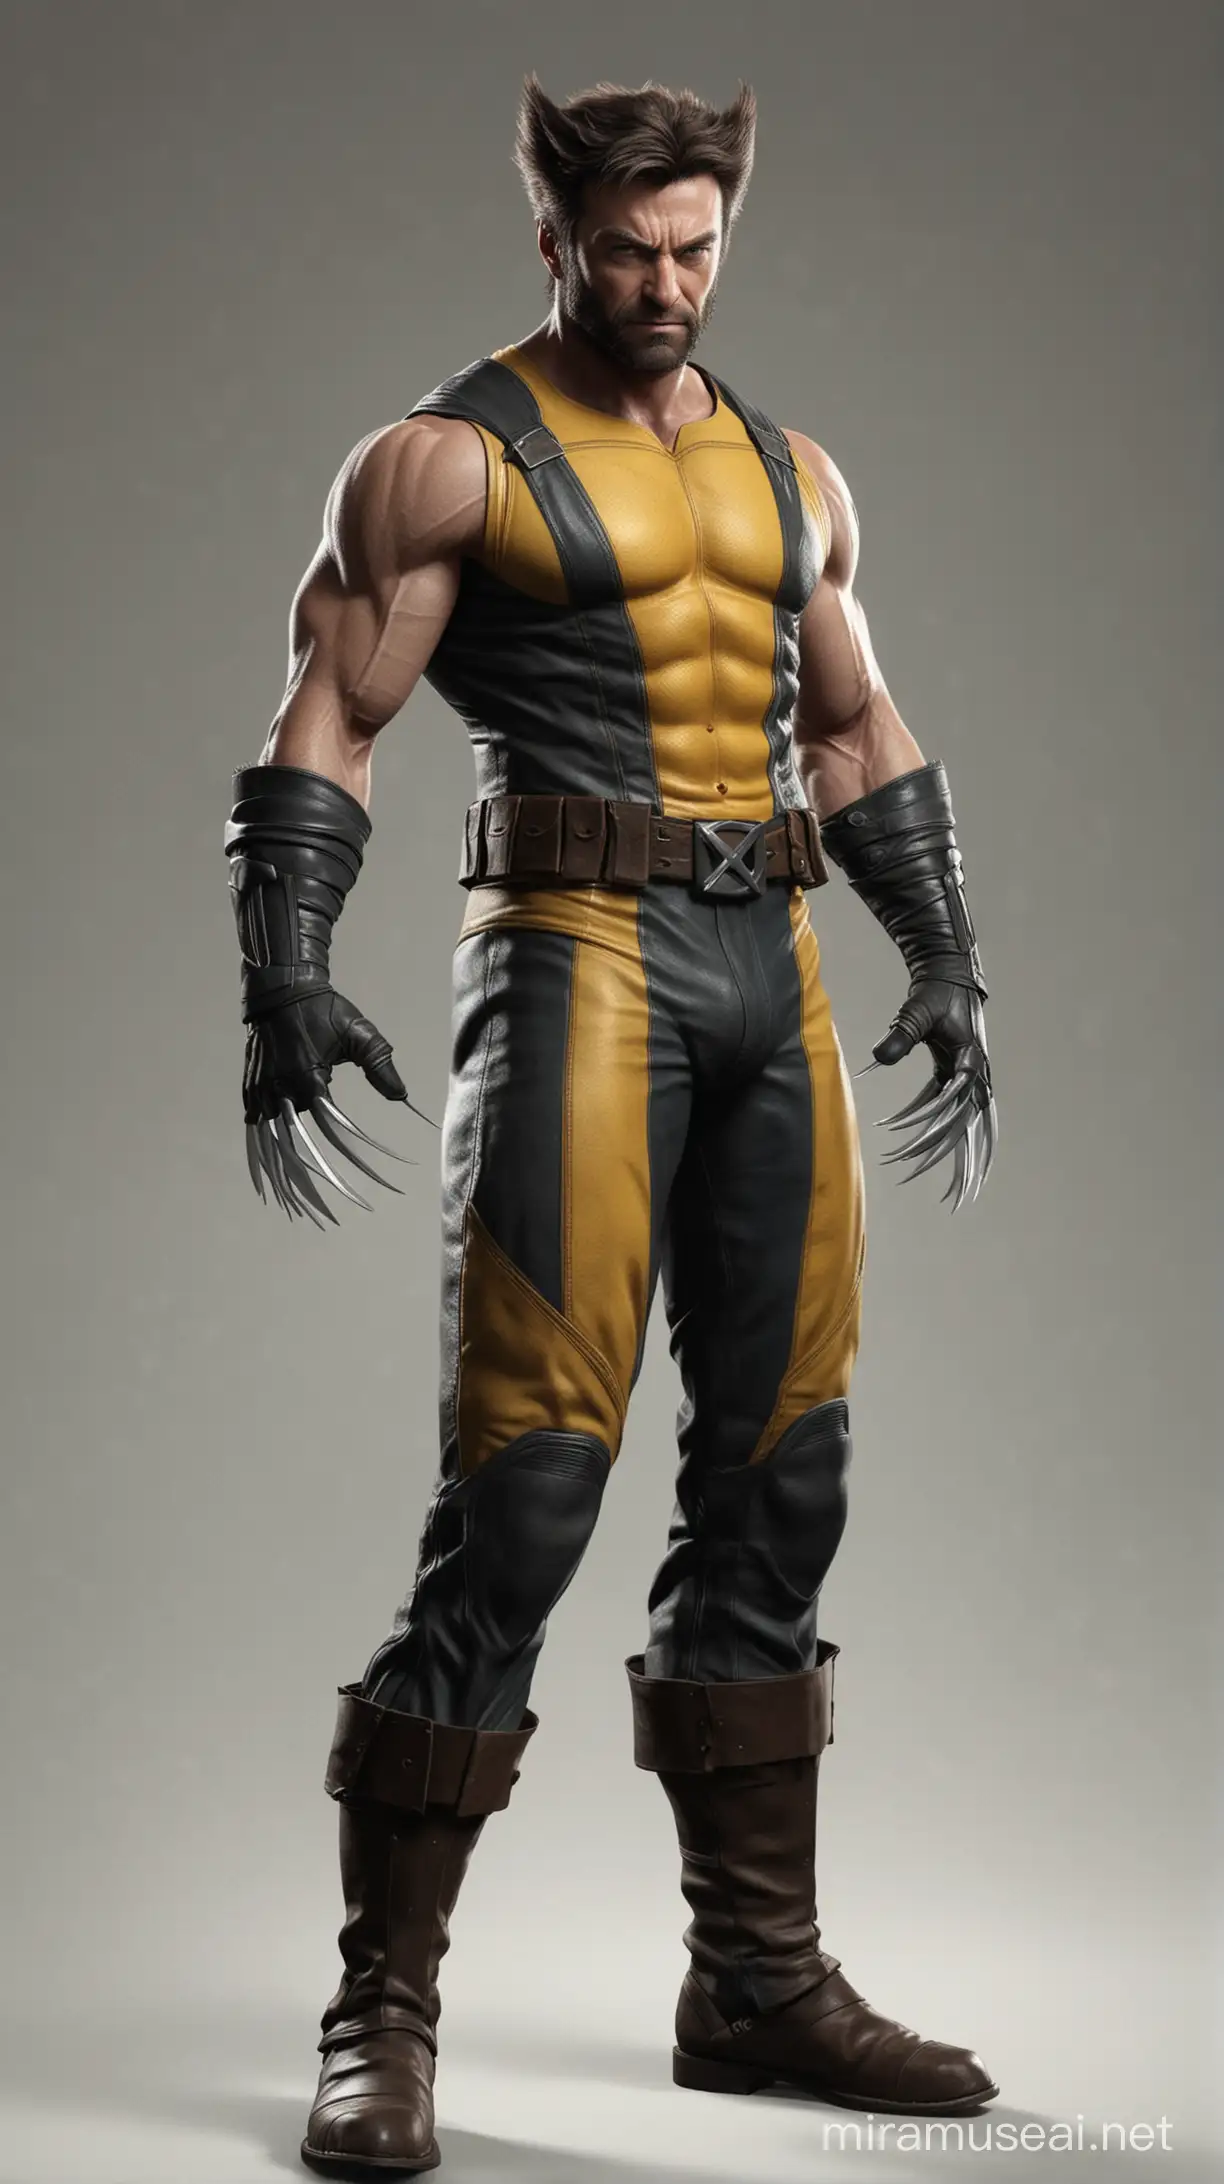 Fullbody Wolverine Character in Dynamic Action Pose